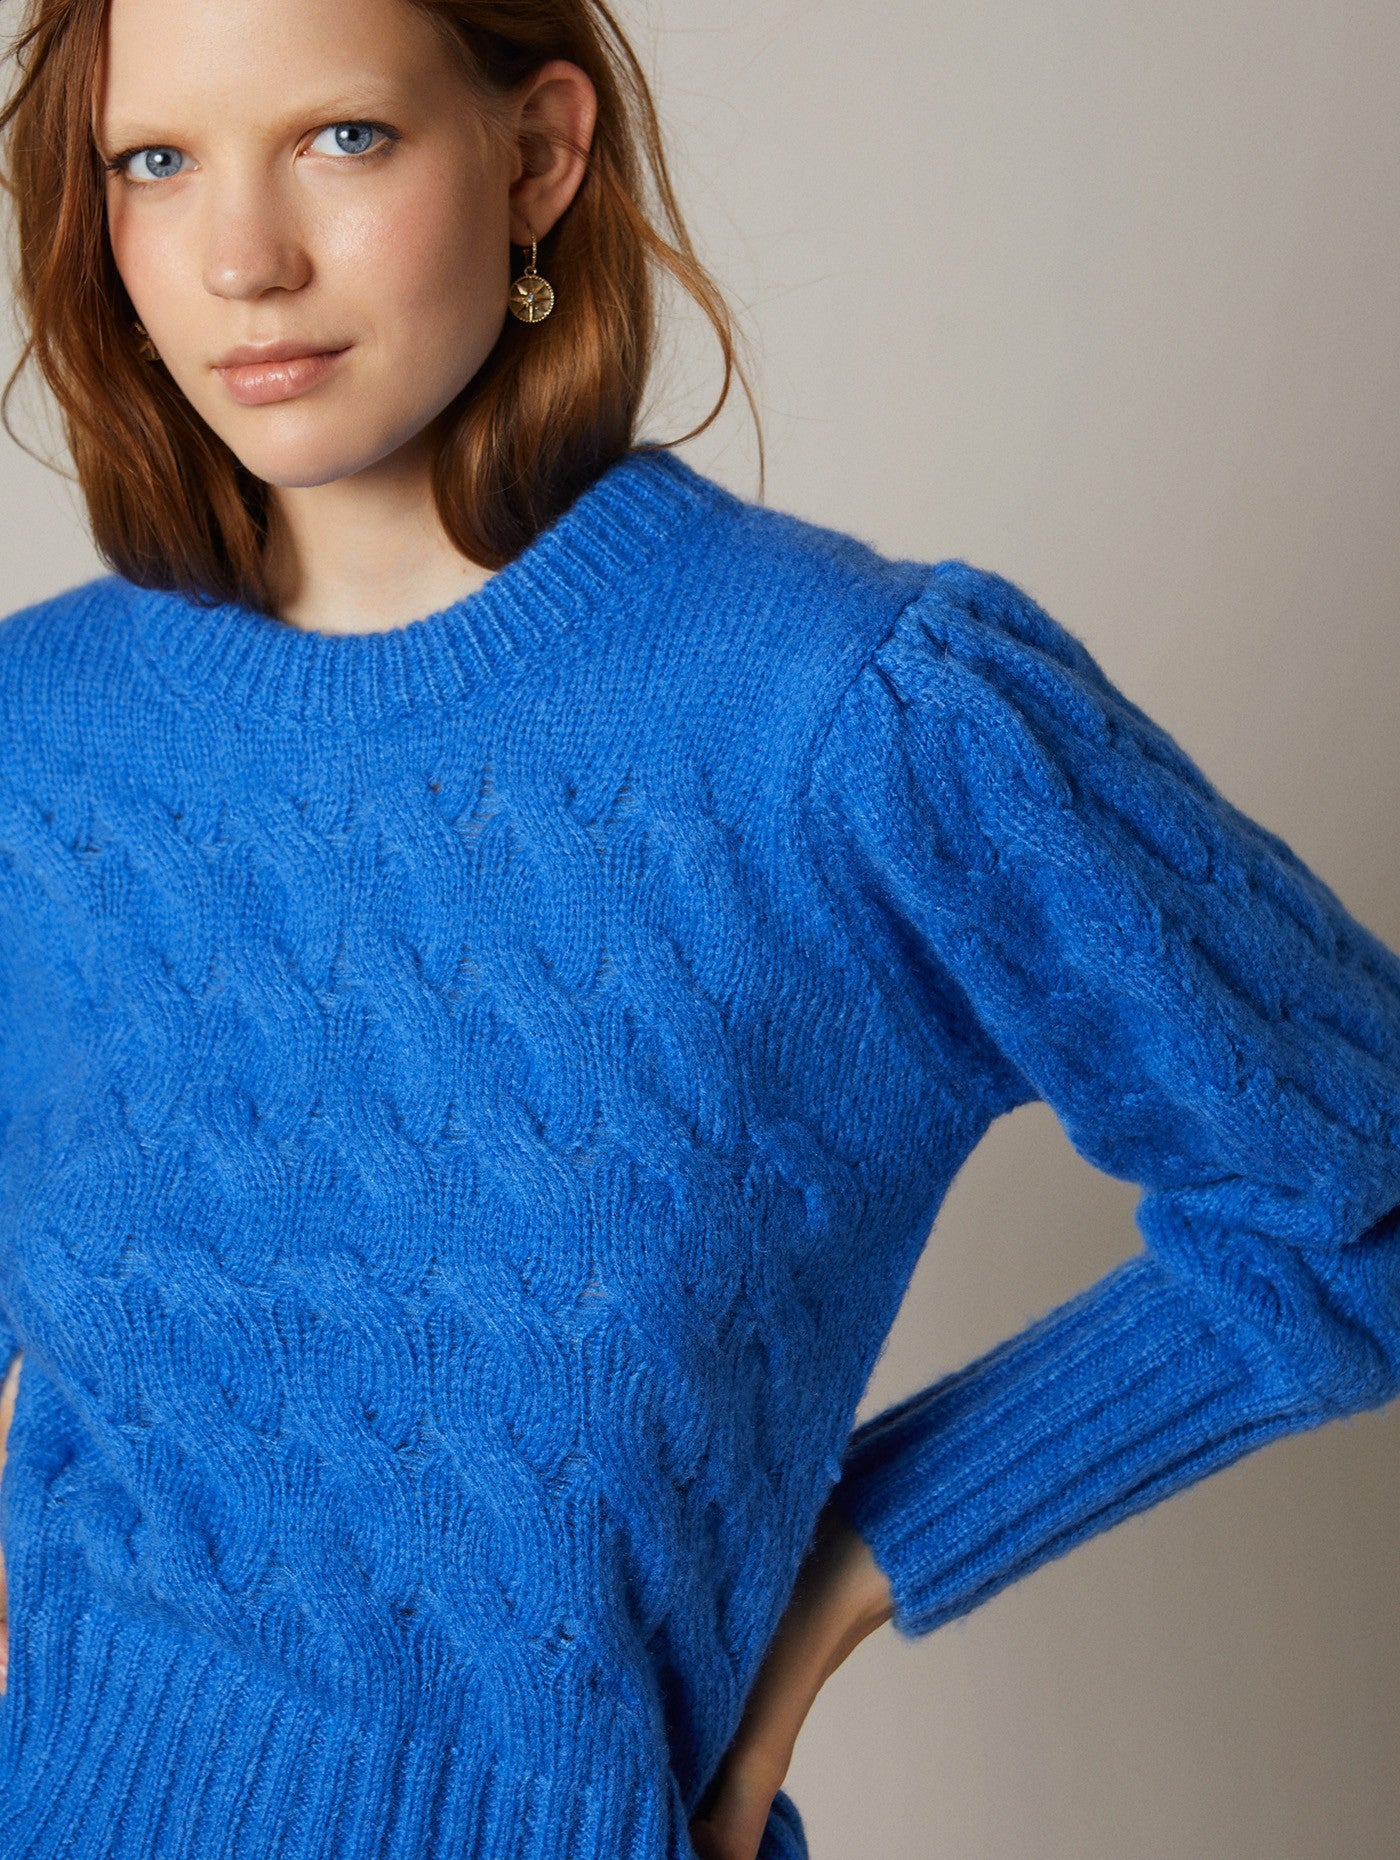 Blue braided knit sweater